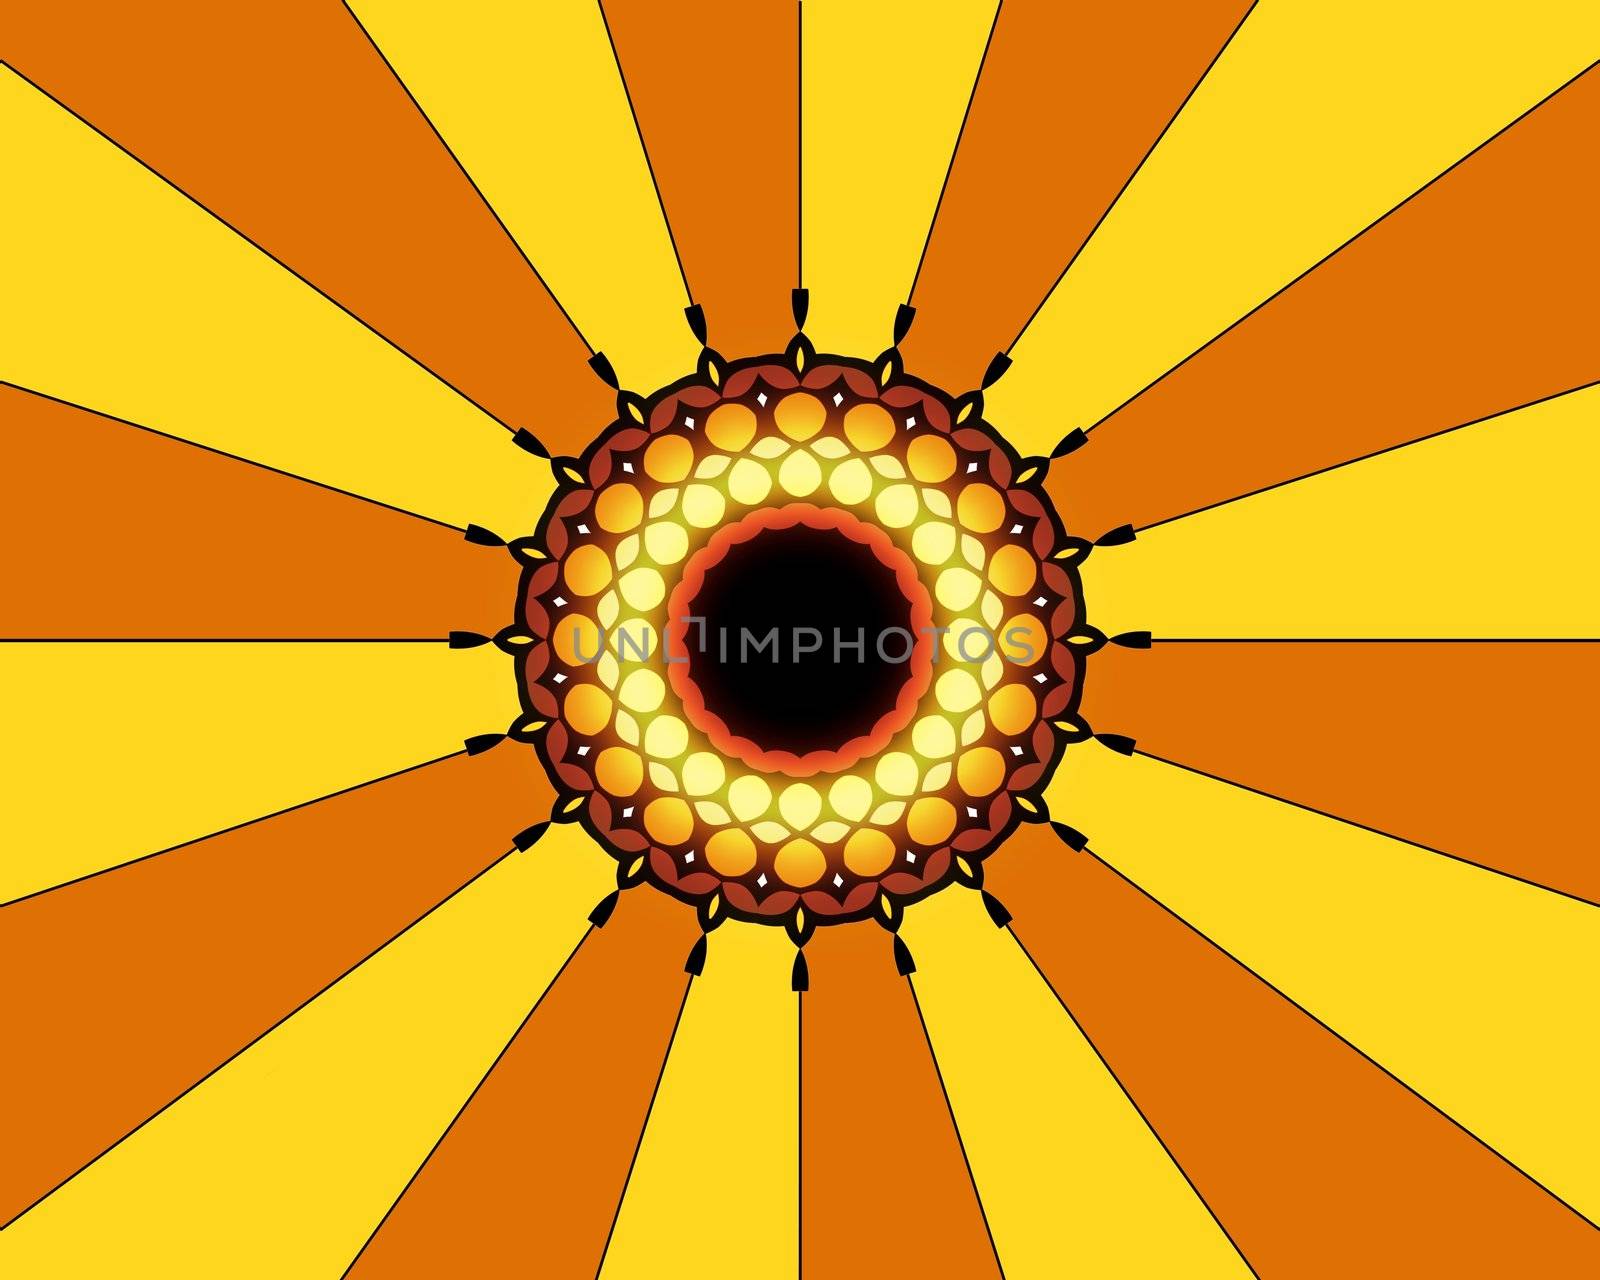 Abstract design in the middle of an orange and yellow background